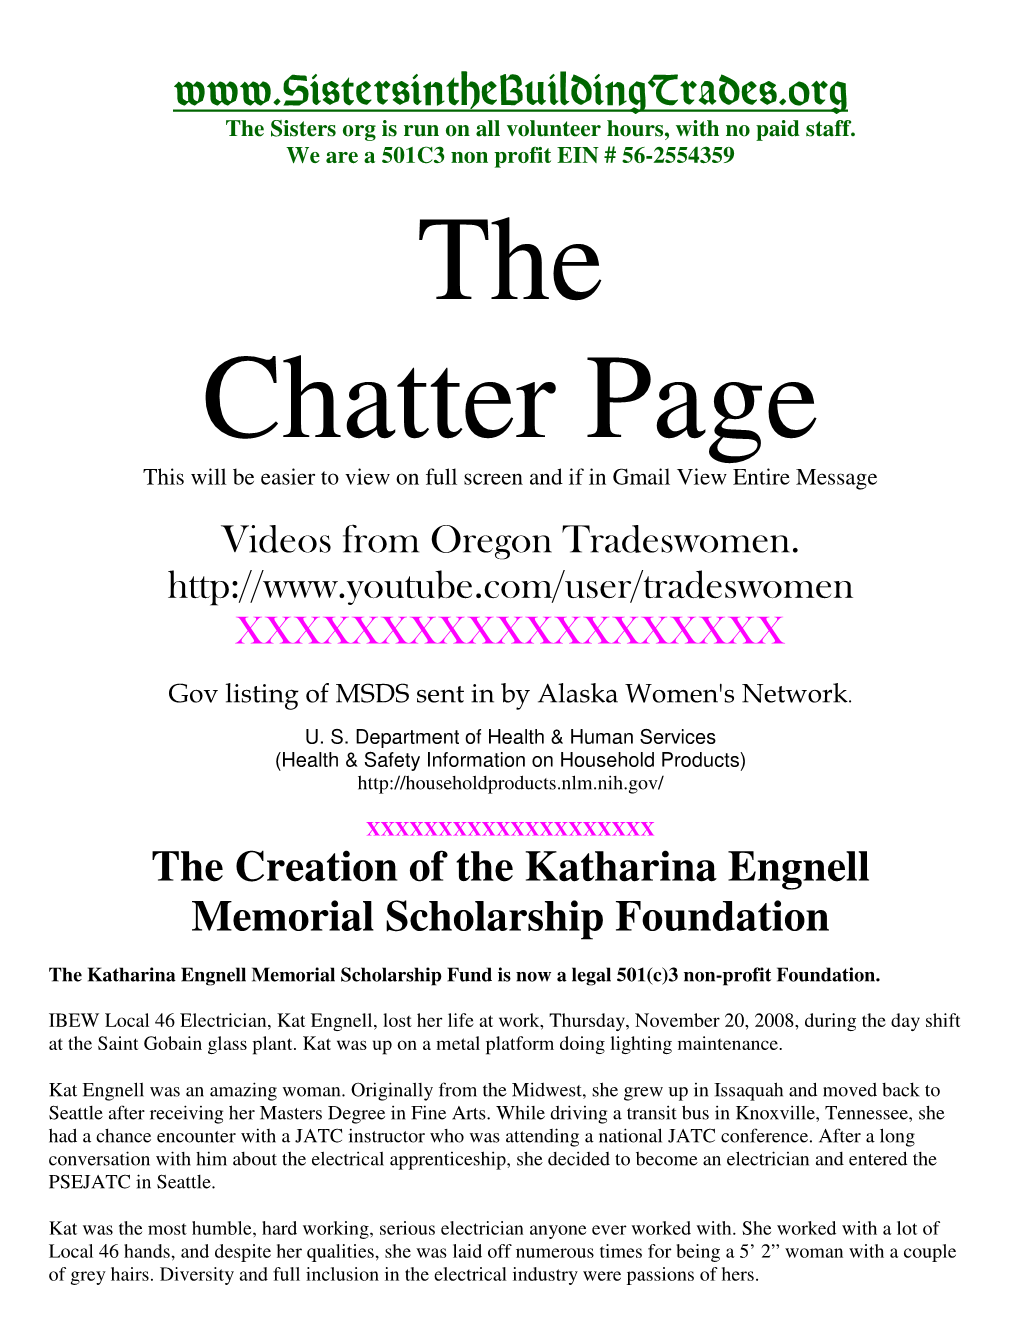 The Creation of the Katharina Engnell Memorial Scholarship Foundation